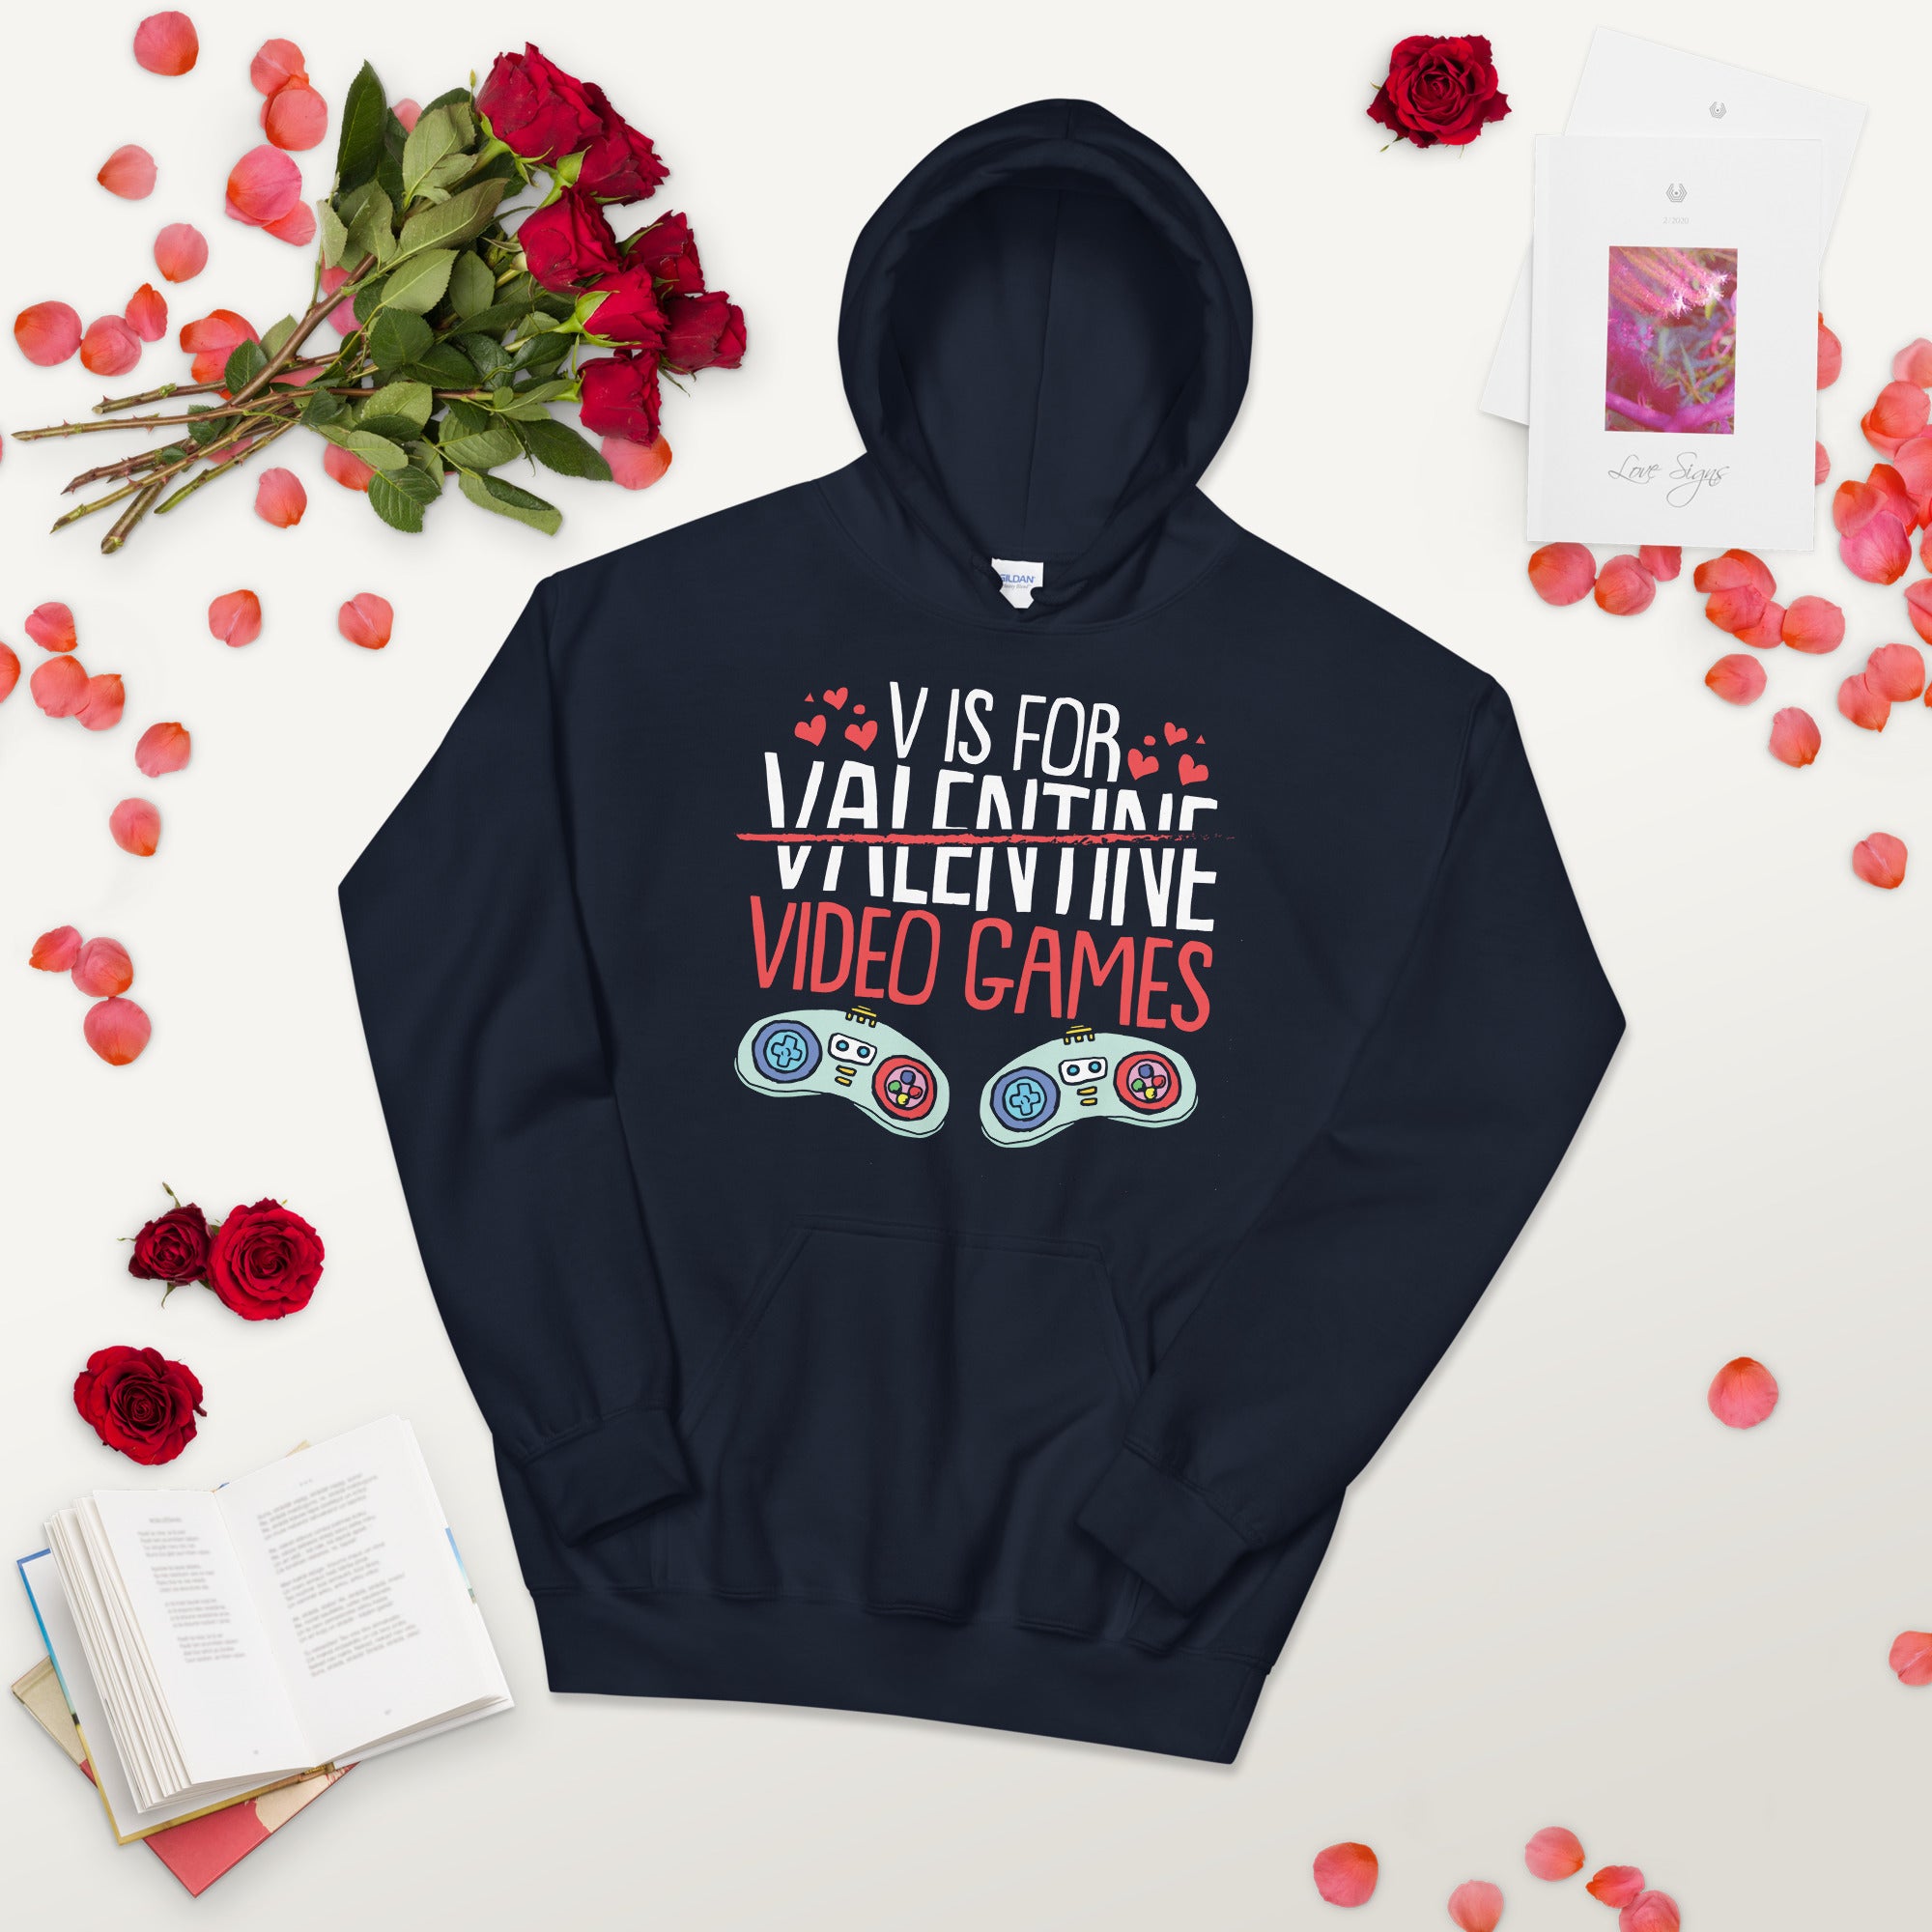 V Is For Video Games, Video Game Hoodie, Gifts For Gamers, Gaming Lover Shirt, Gaming Hoodie, Valentines Day Gaming Hoodie, Funny Gamer Gift - Madeinsea©